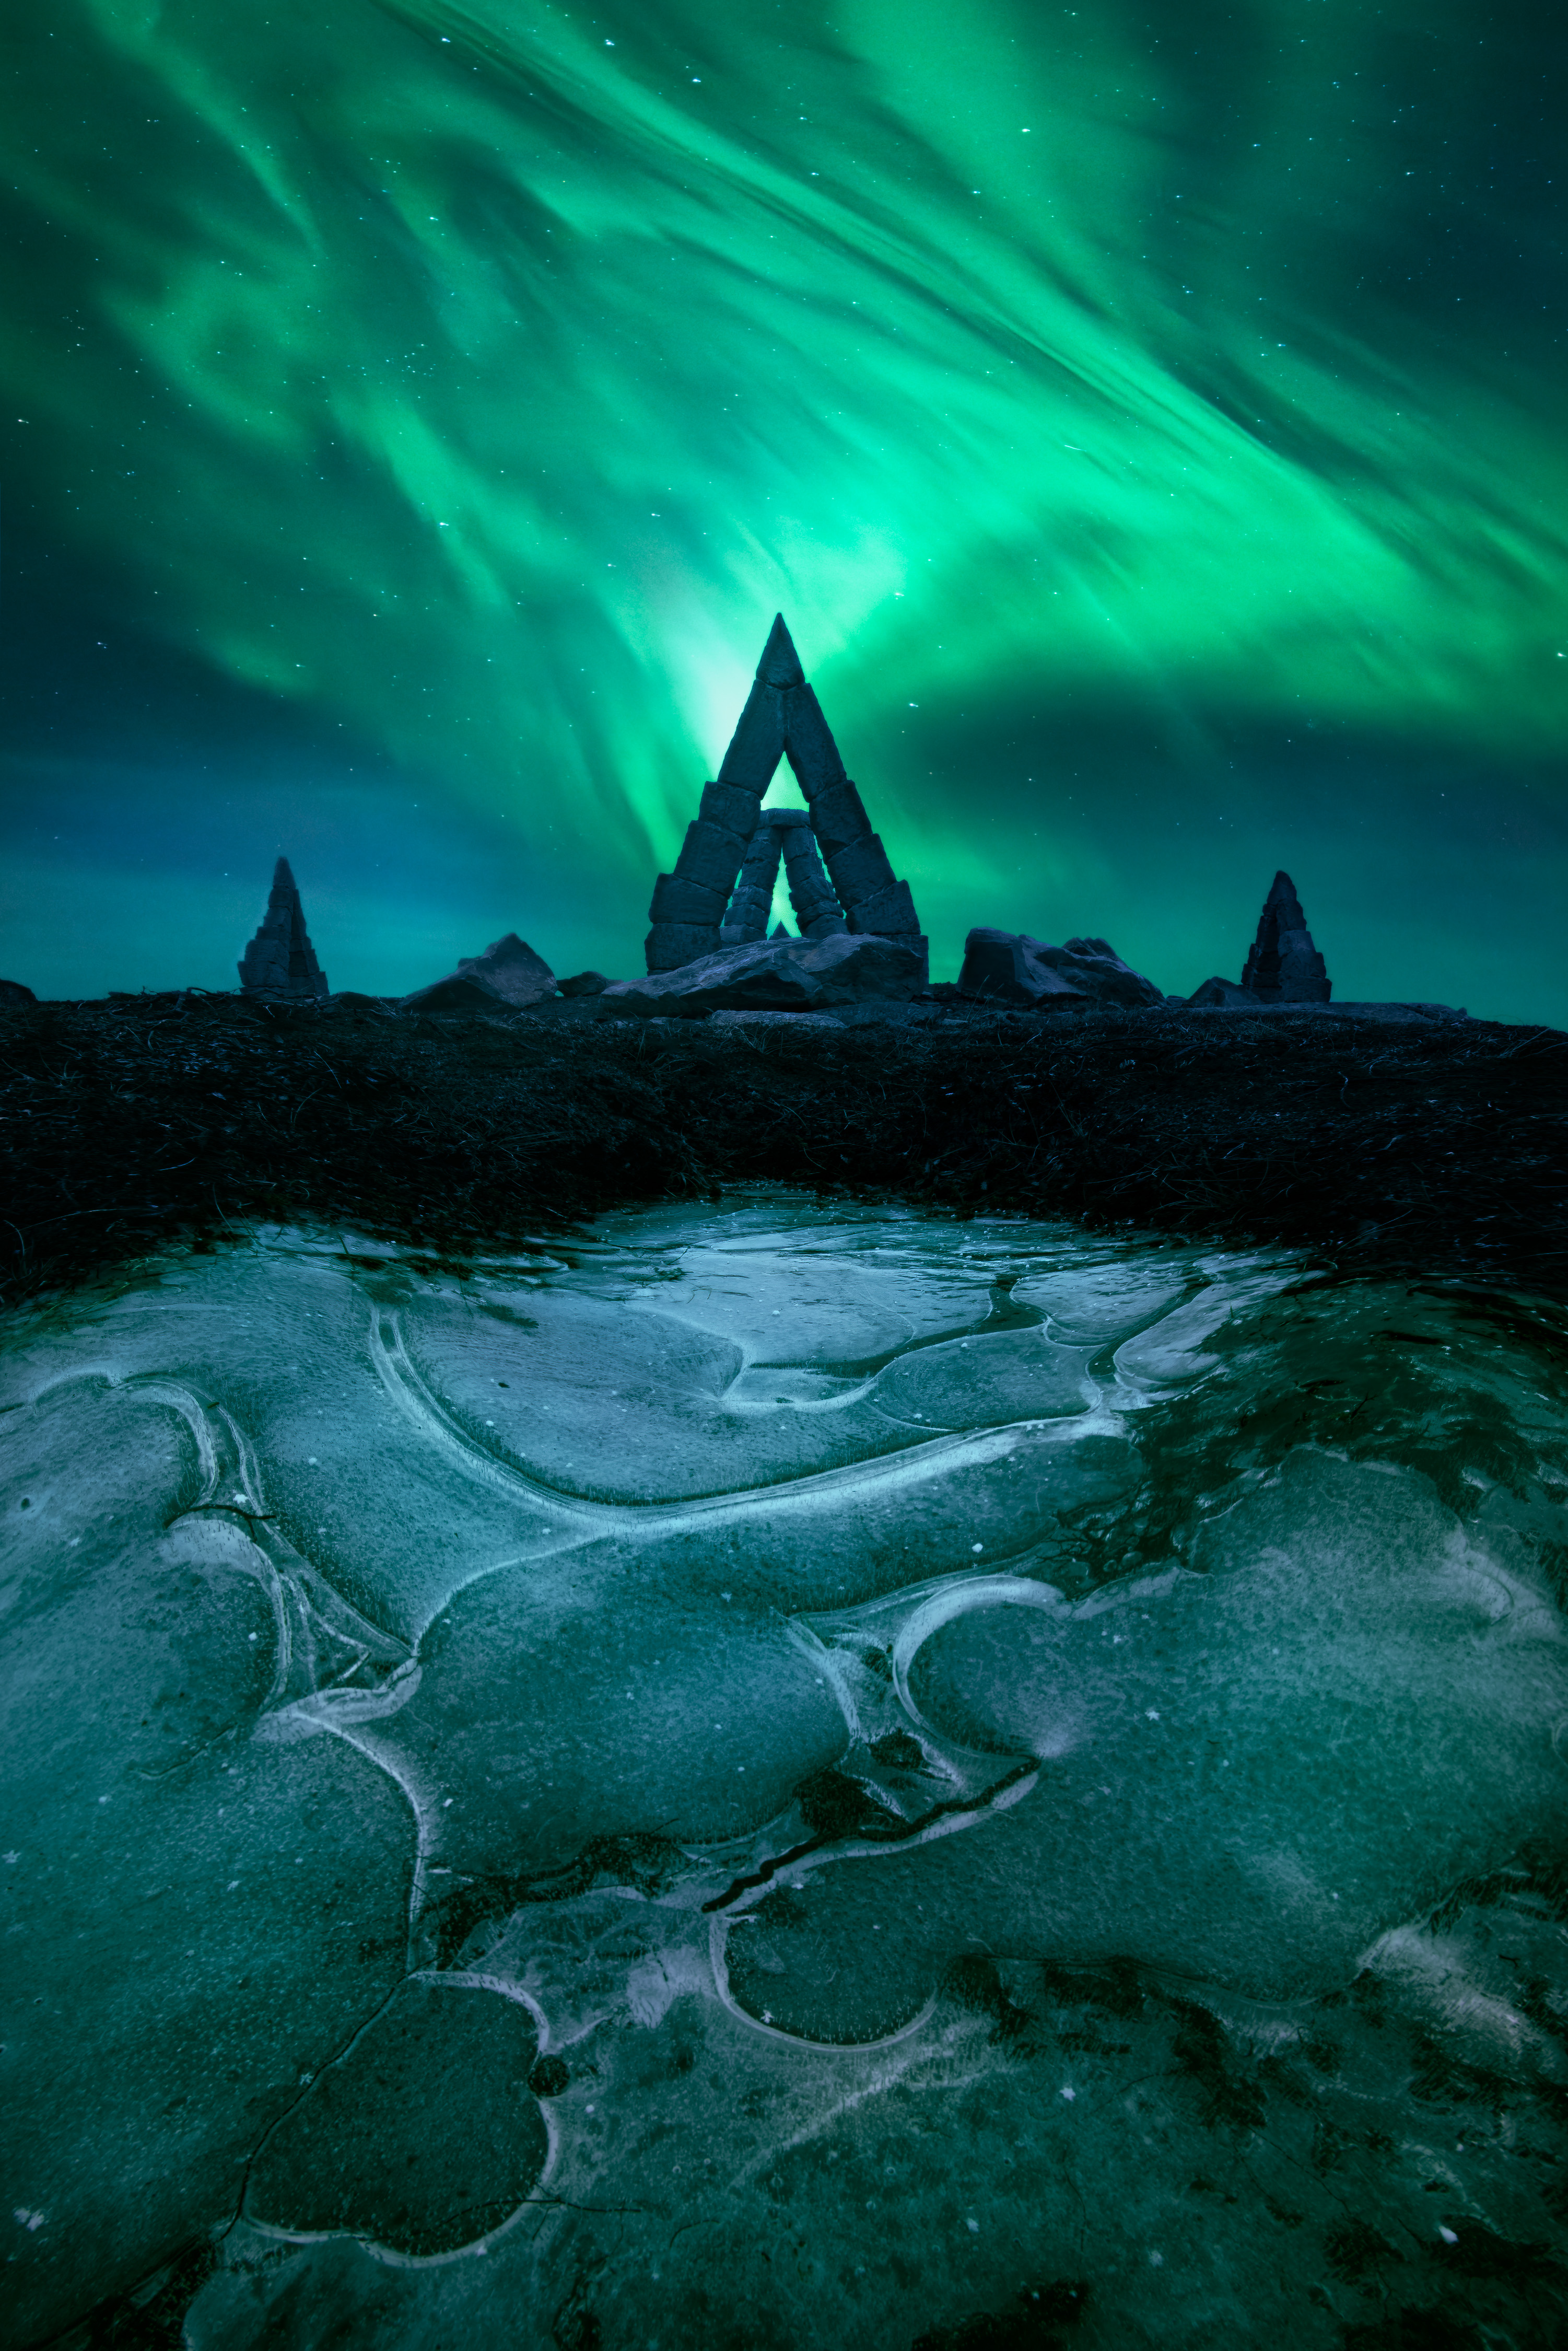 Arctic Gates - The Northern Lights over the mammoth sundial Arctic Henge, which is inspired by Norse mythology.